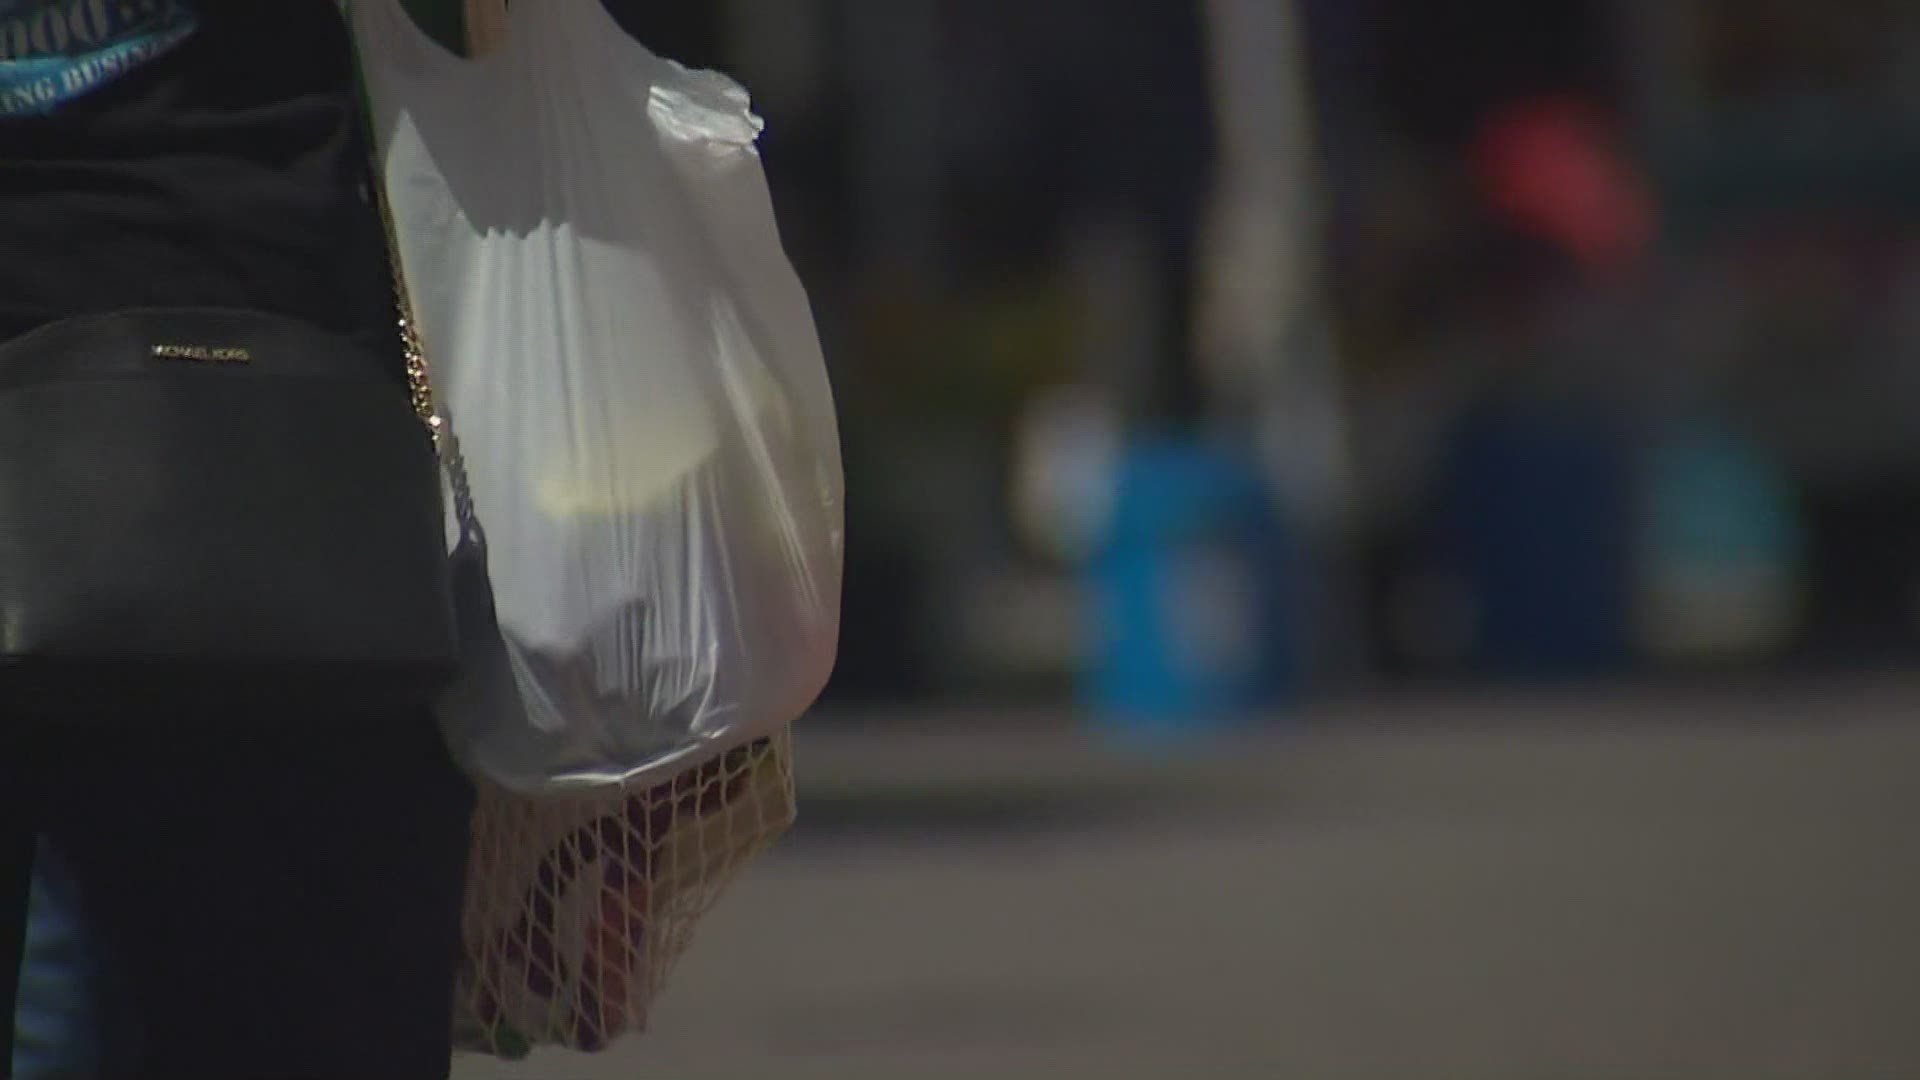 A new law banning single-use plastic bags in Washington starting this fall has some business owners concerned about costs after a year of economic hardships.